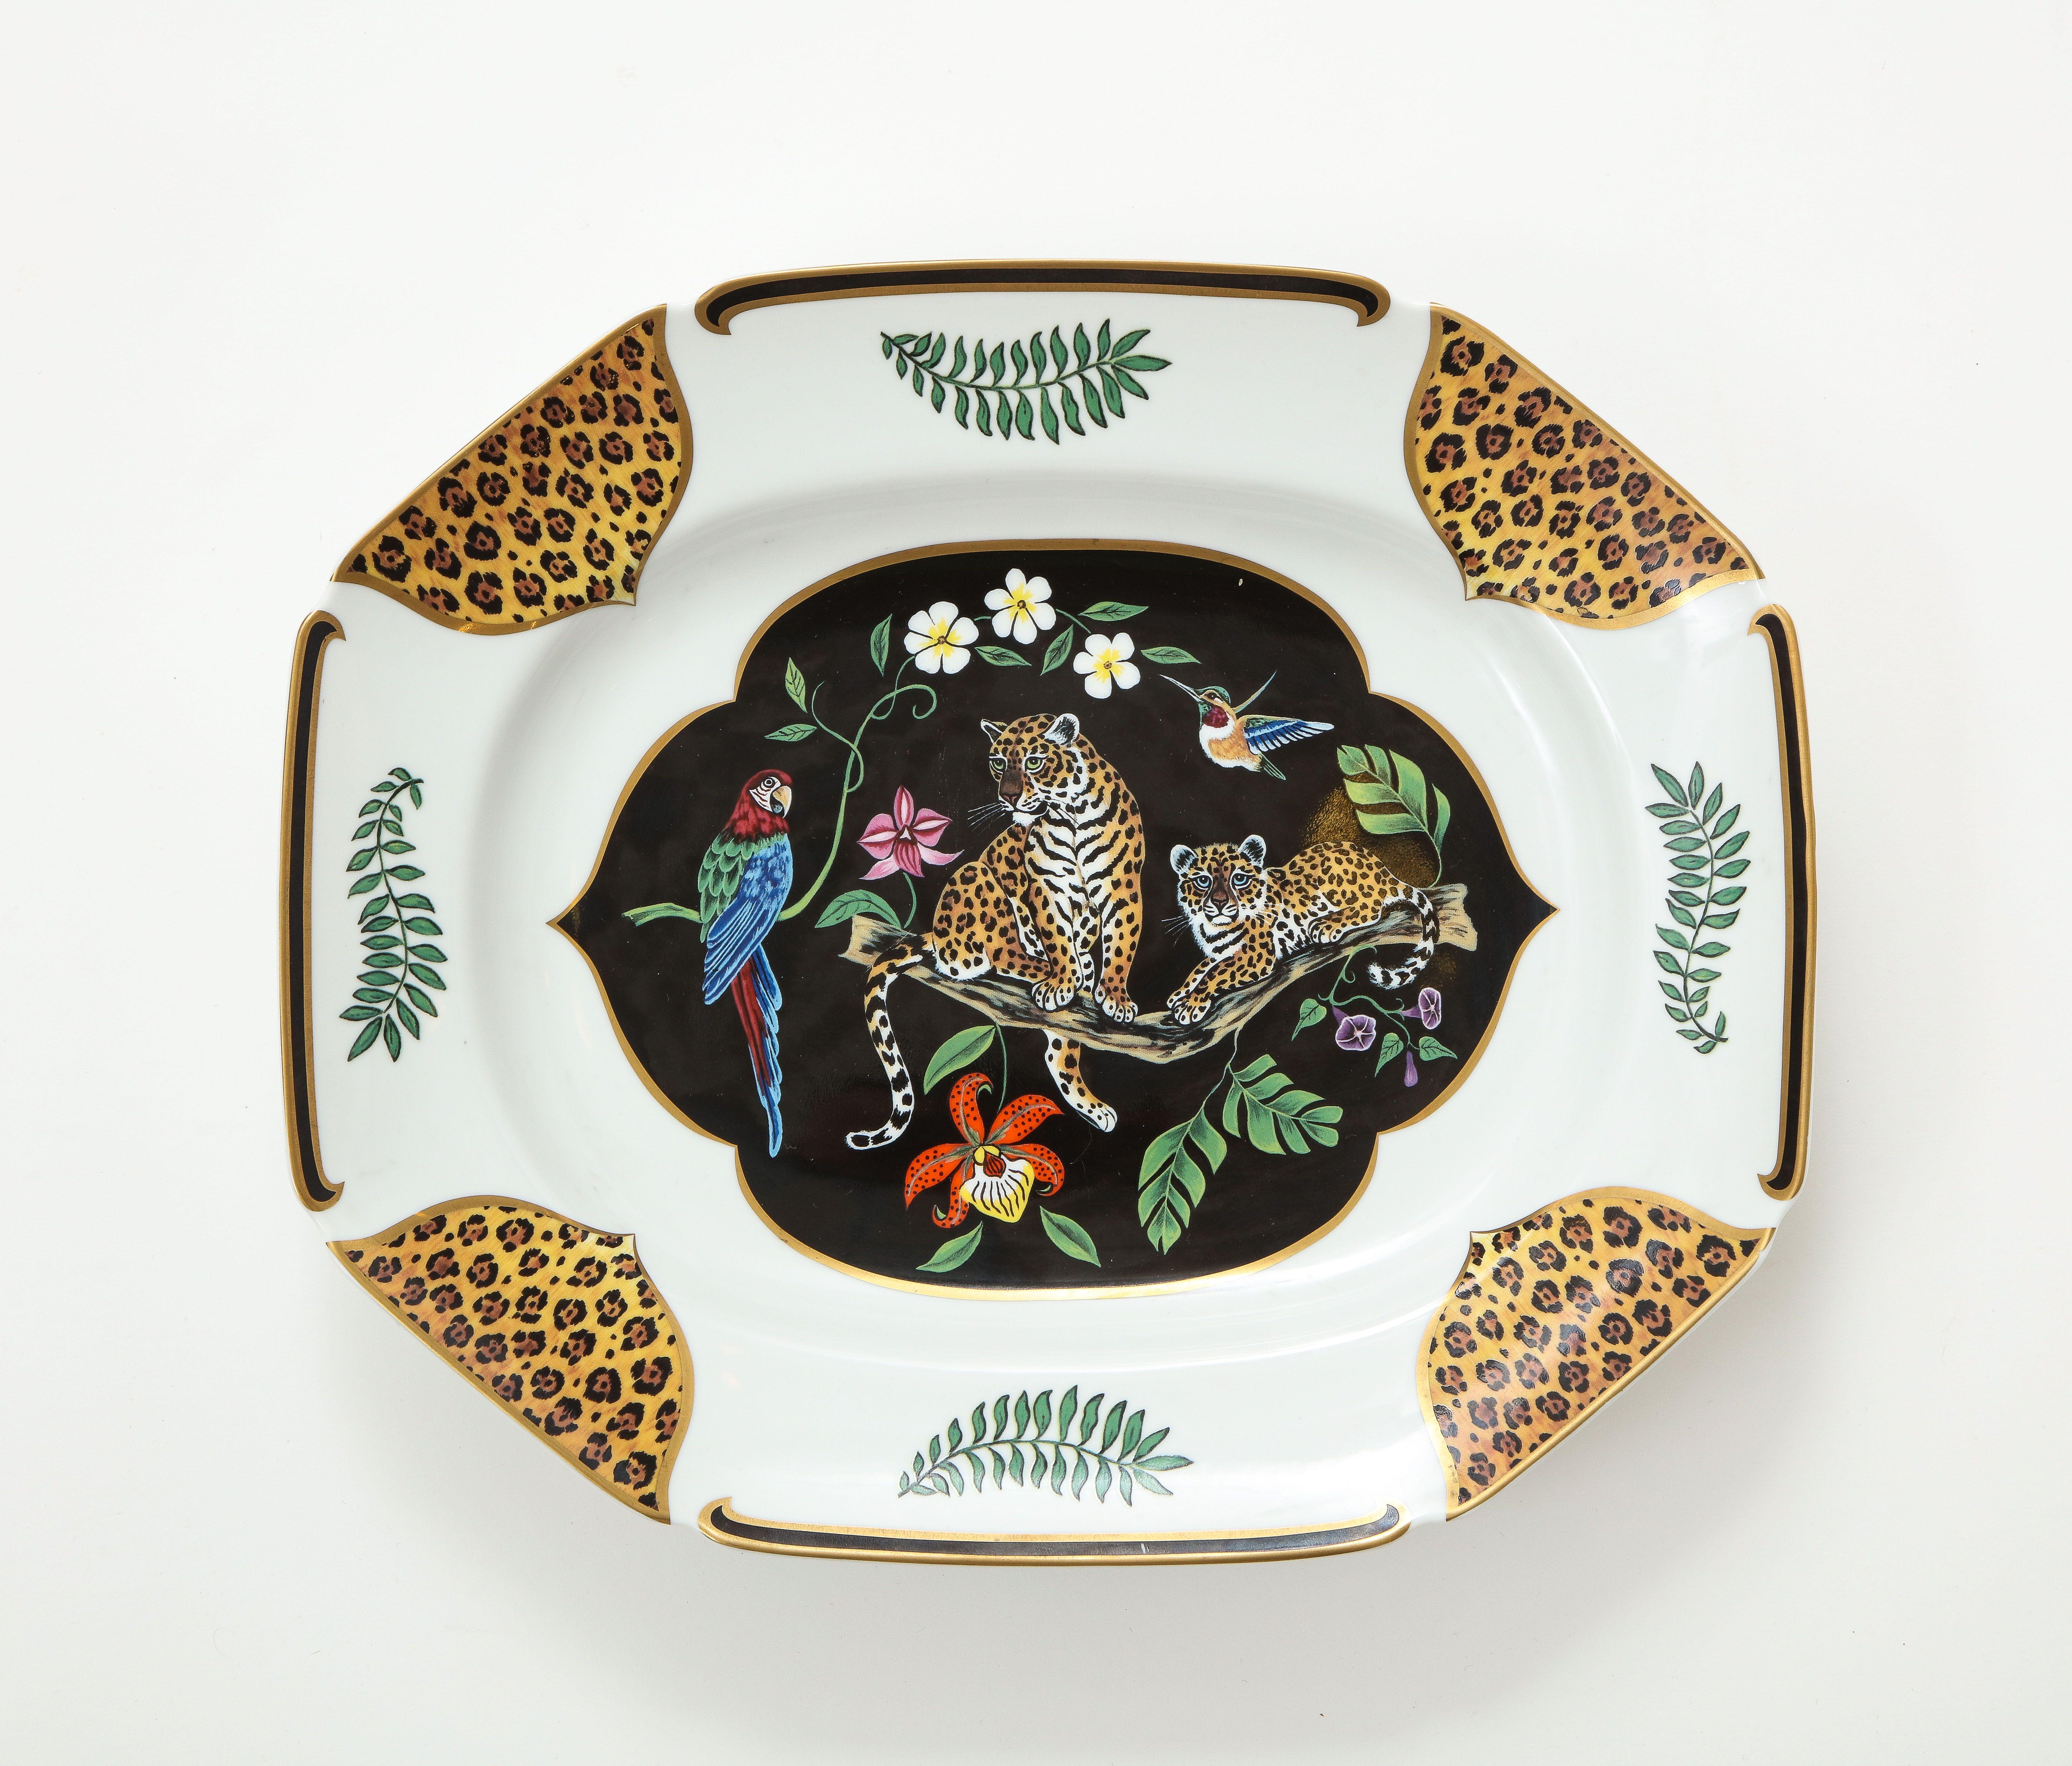 A set of great dinnerware by Lynn Chase. Jaguar Jungle is a wonderful pattern with animals surrounded by lush foliage and gilded in 24 k Gold. Six place settings and a platter. Measures: 1.5 x 8 x 6 in.